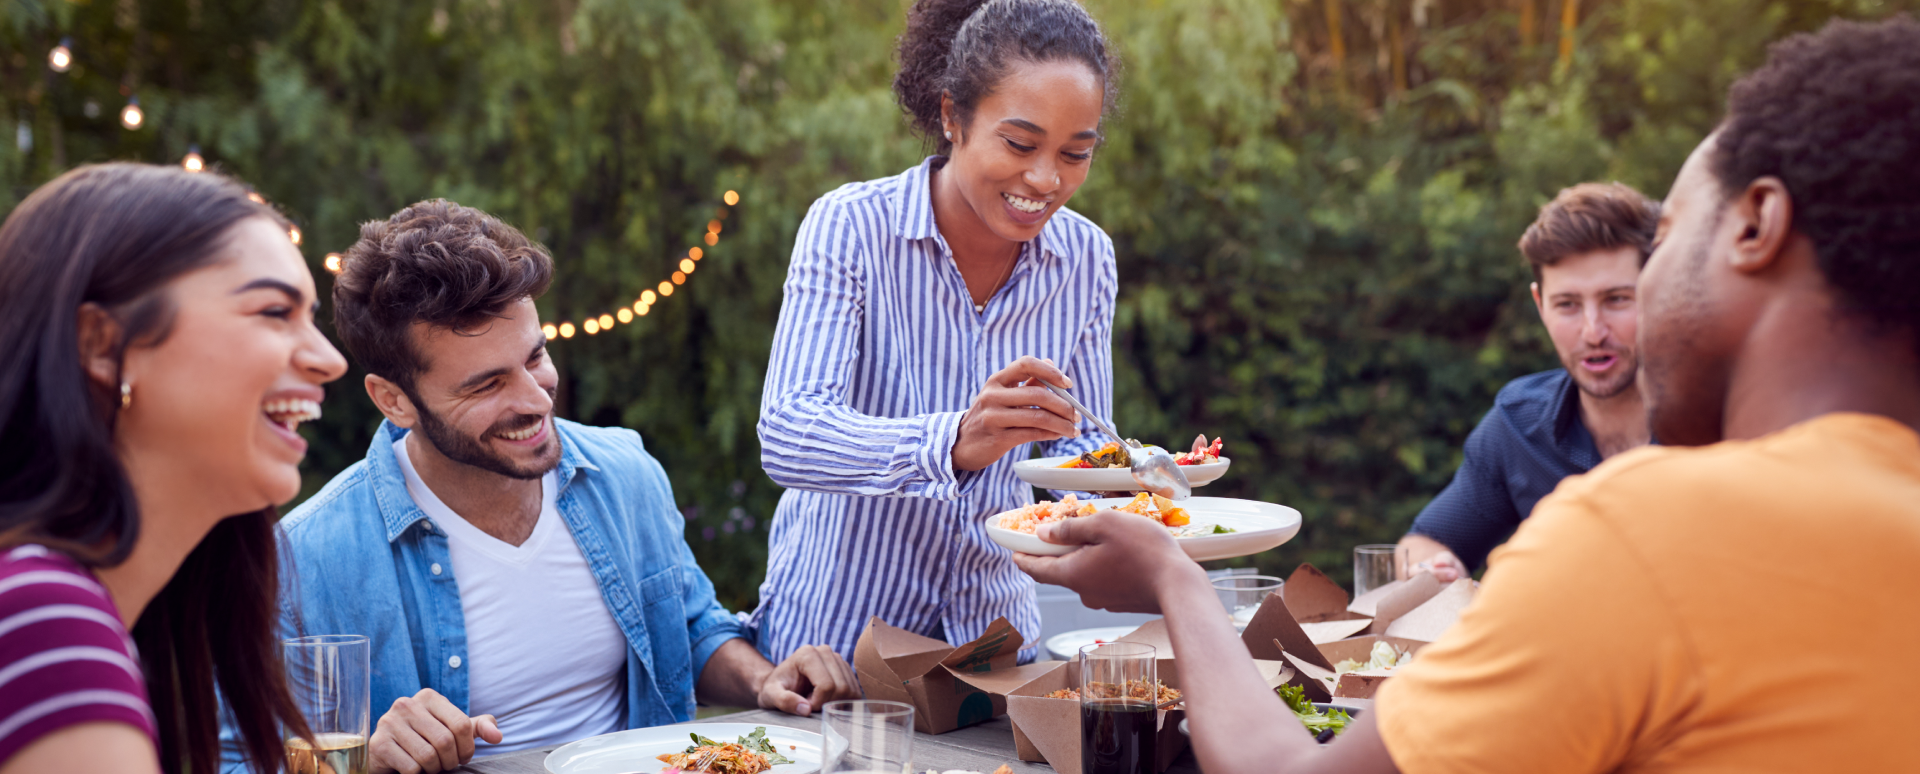 Five people of various ethnicities sit outside at a picnic table smiling and eating.